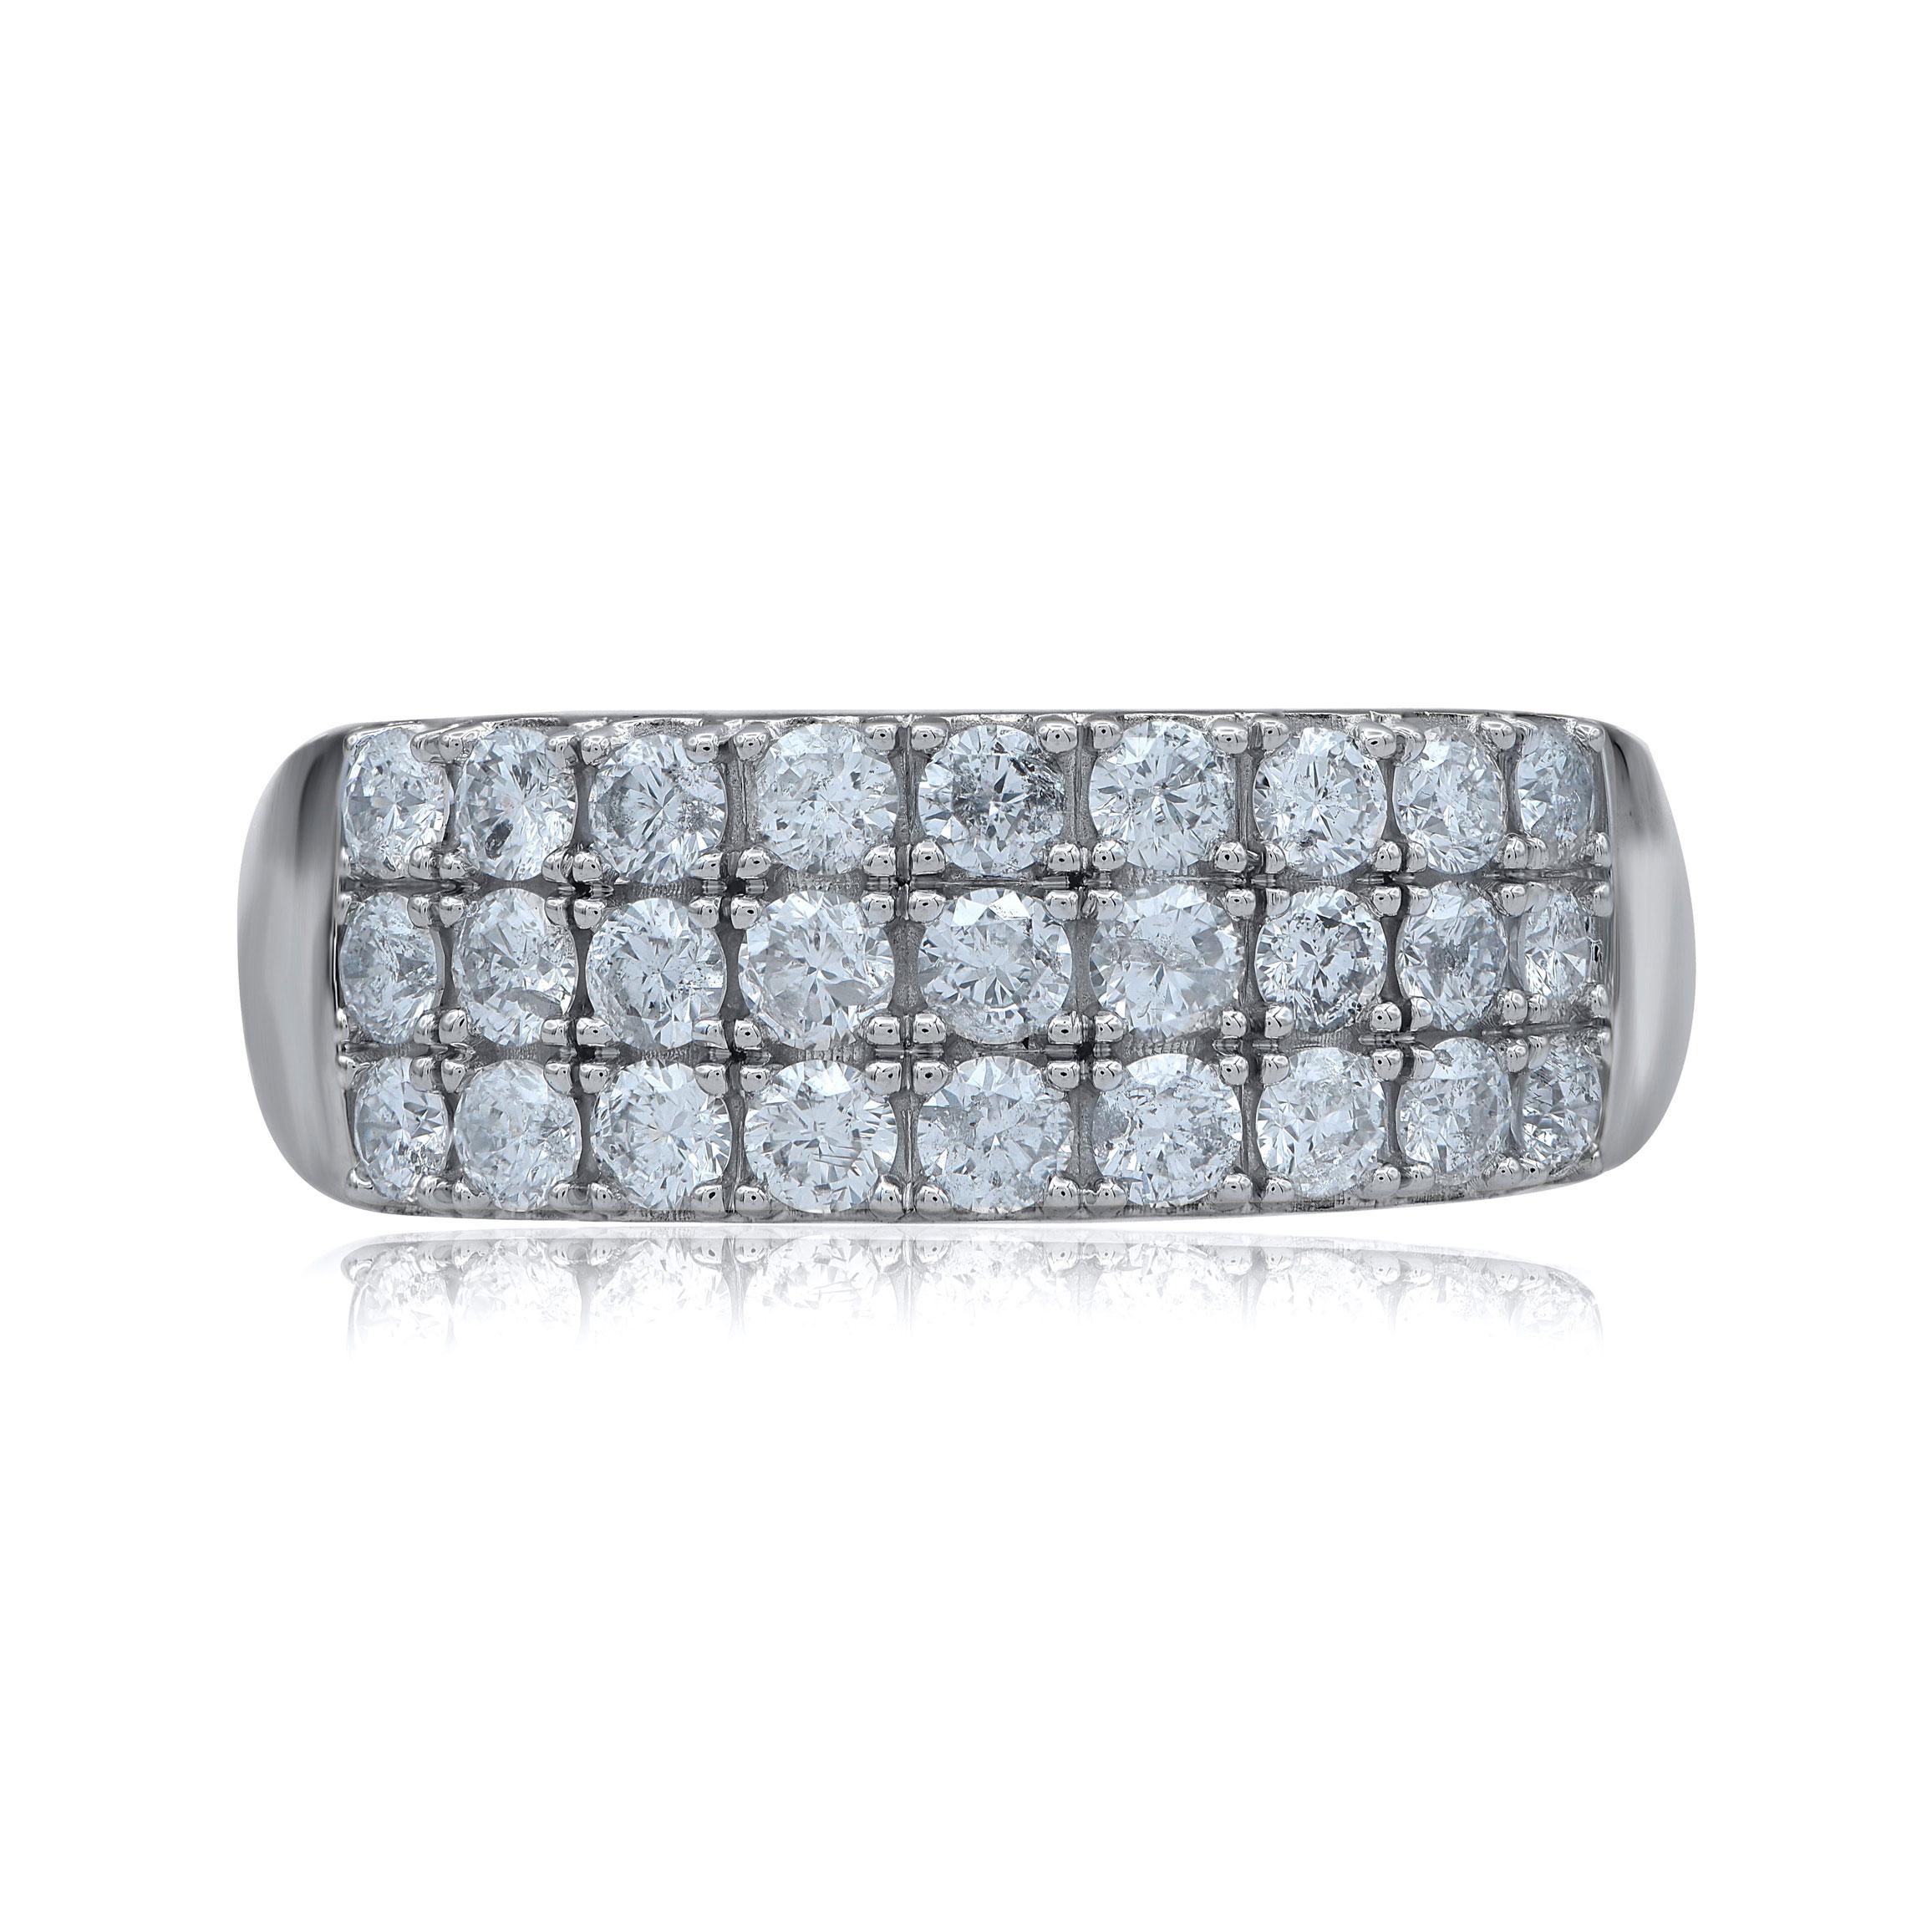 Honor your special day with this exceptional diamond band ring. This band ring features a sparkling 27 brilliant cut round diamonds beautifully set in prong setting. The total diamond weight is 1.25 Carat. The diamonds are graded as H-I color and I2